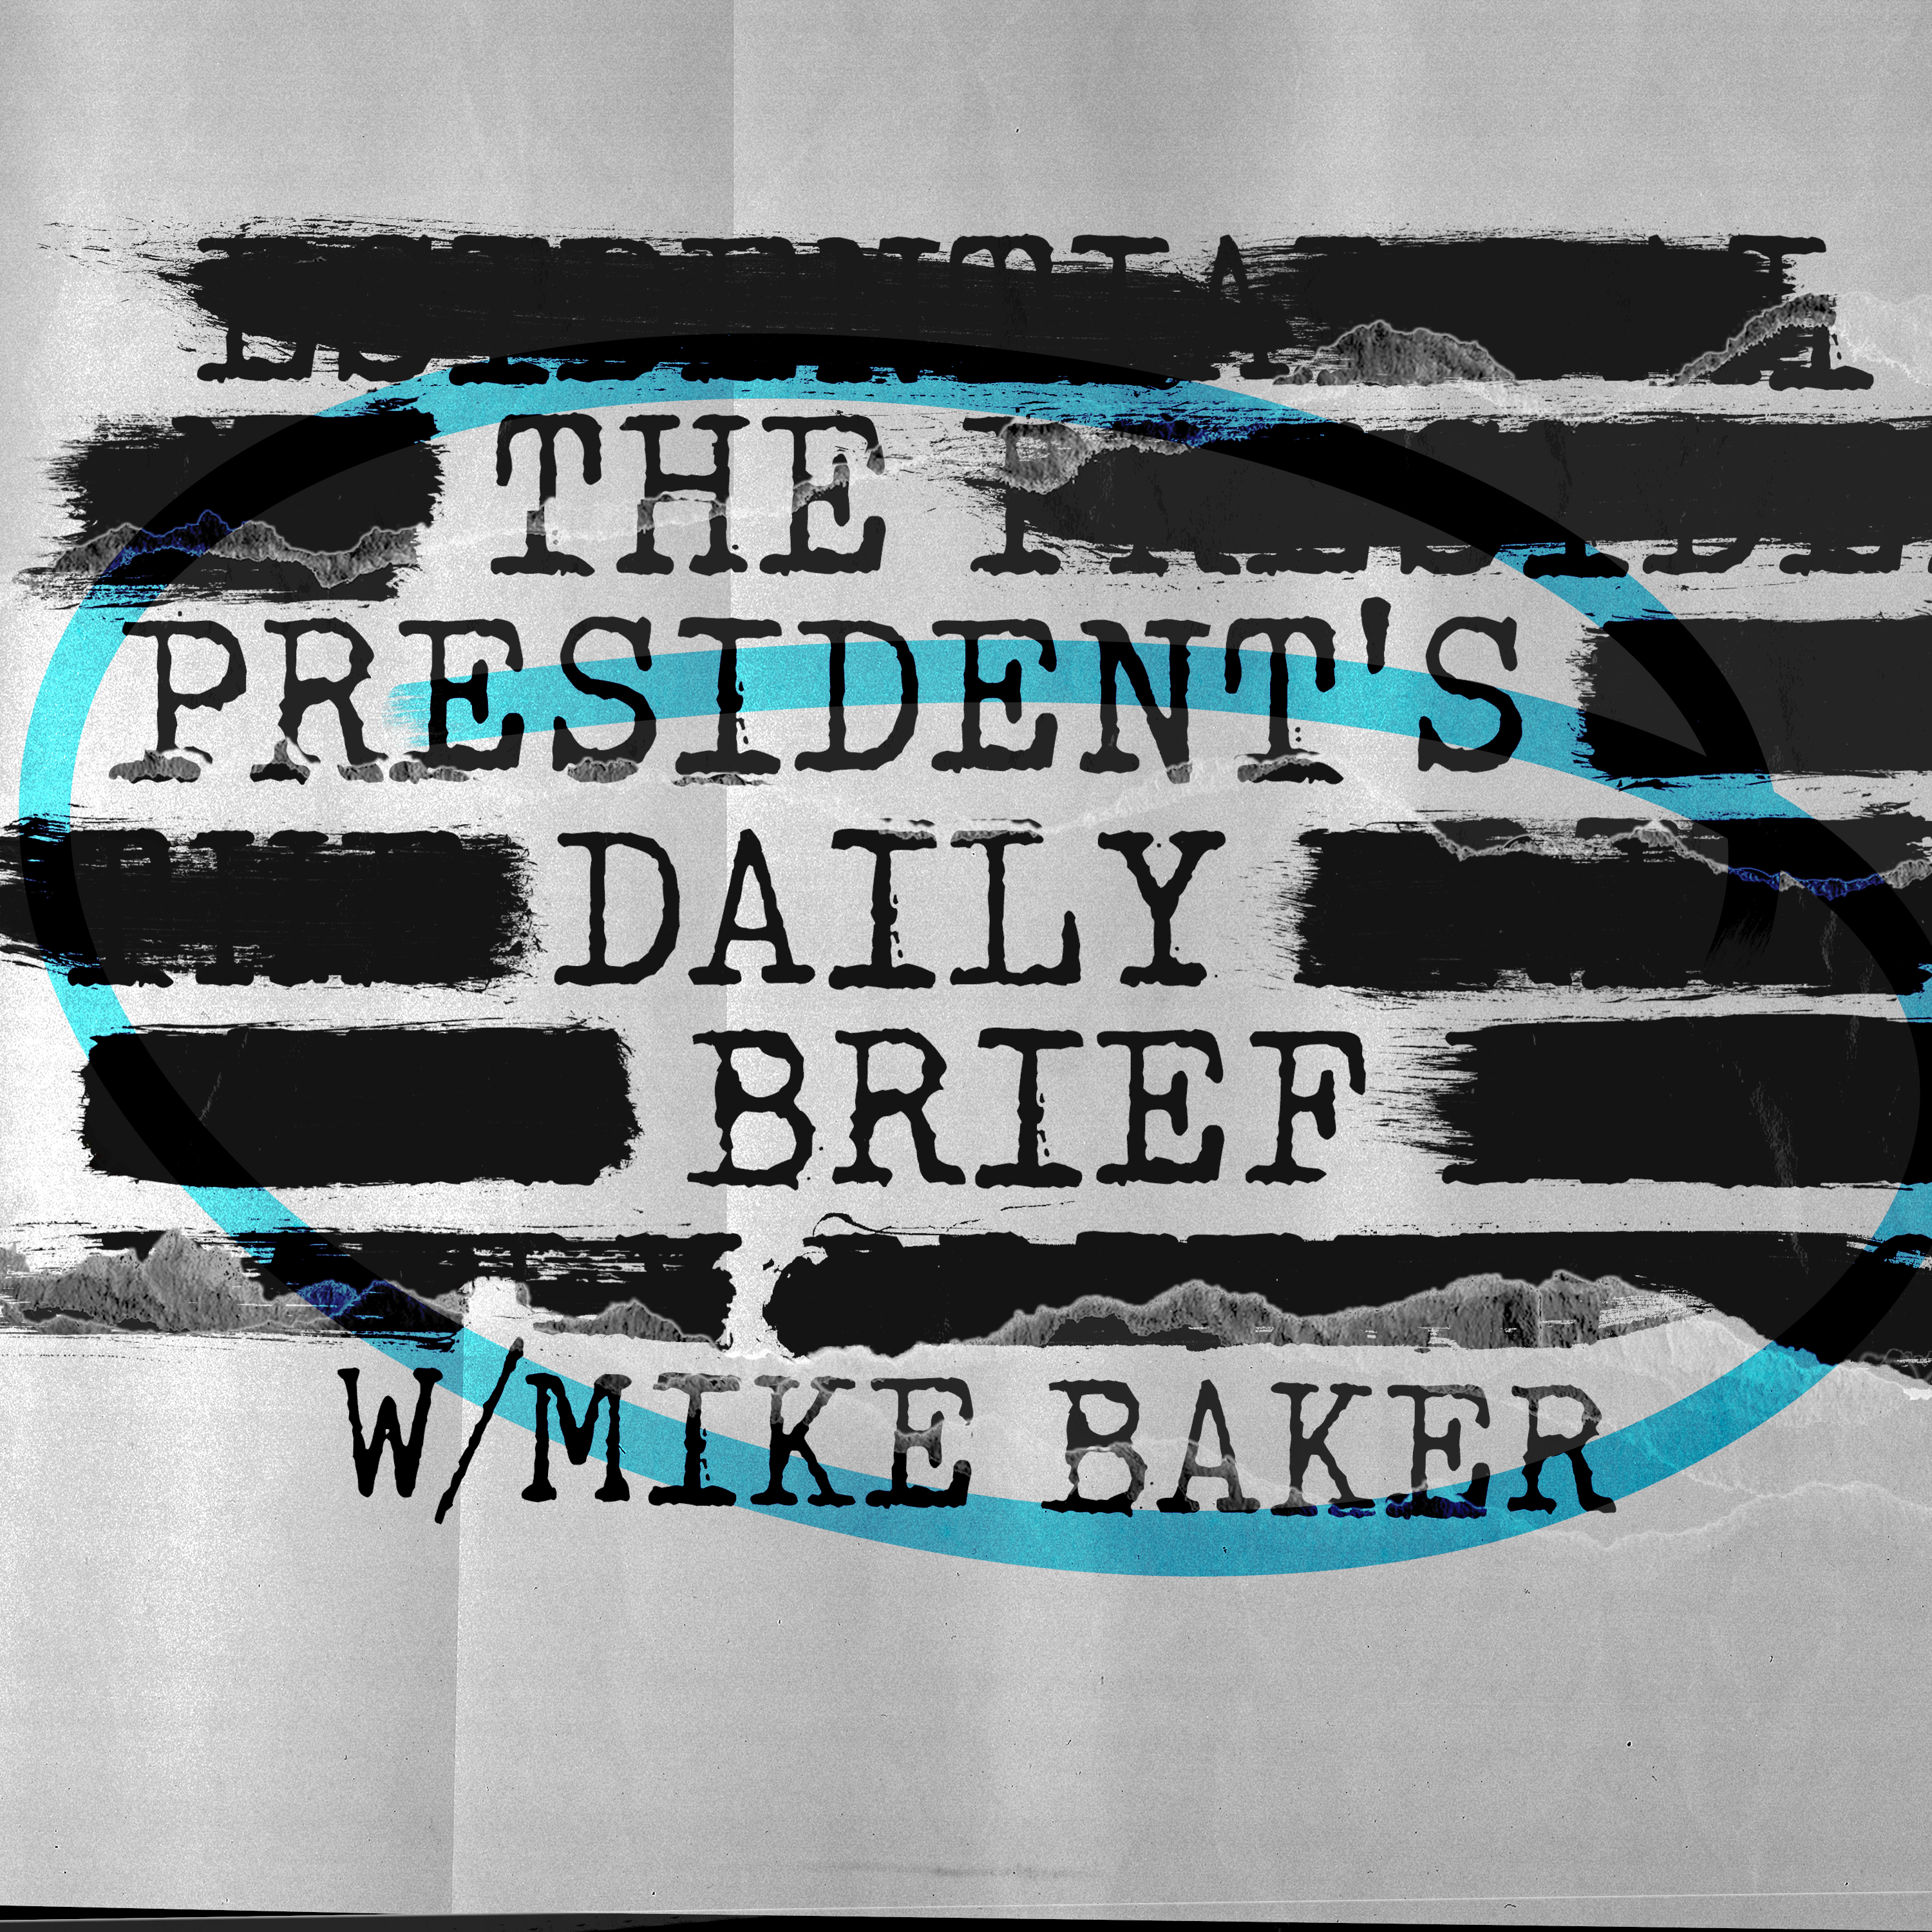 September 28th, 2023: Biden’s Troubles, Fauci’s CIA Mission, and Nazi Ovation Fallout : In this episode of The President’s Daily Brief:Day 1 of Impeachment Inquiry of President Joe Biden takes an unexpected turn. As the controversy surrounding his son, Hunter Biden’s business dealings deepens, Republicans on the House Oversight Committee shed light on hefty funds received by Hunter from Chinese business partners. And the surprise? The beneficiary address on these transactions is Joe Biden’s Delaware home.We delve into shocking allegations that Dr. Anthony Fauci made a clandestine visit to CIA headquarters, with claims suggesting he aimed to "influence" the COVID-19 origins probe. Rep. Brad Wenstrup’s revelations might just rewrite the COVID-19 origin story.Switching gears, we focus on an international story: U.S. Army Pvt. Travis King’s surprising escape to North Korea and his recent return to American hands.In our ’Back of the Brief’ segment, we update you on Canada’s parliament’s controversial standing ovation to a former Nazi soldier. The consequences? A notable resignation and Poland weighing in on the extradition of the 98-year-old ex-SS member.Please remember to subscribe if you enjoyed this episode of The President’s Daily Brief.Email:�PDB@TheFirstTV.comLearn more about your ad choices. Visit megaphone.fm/adchoices